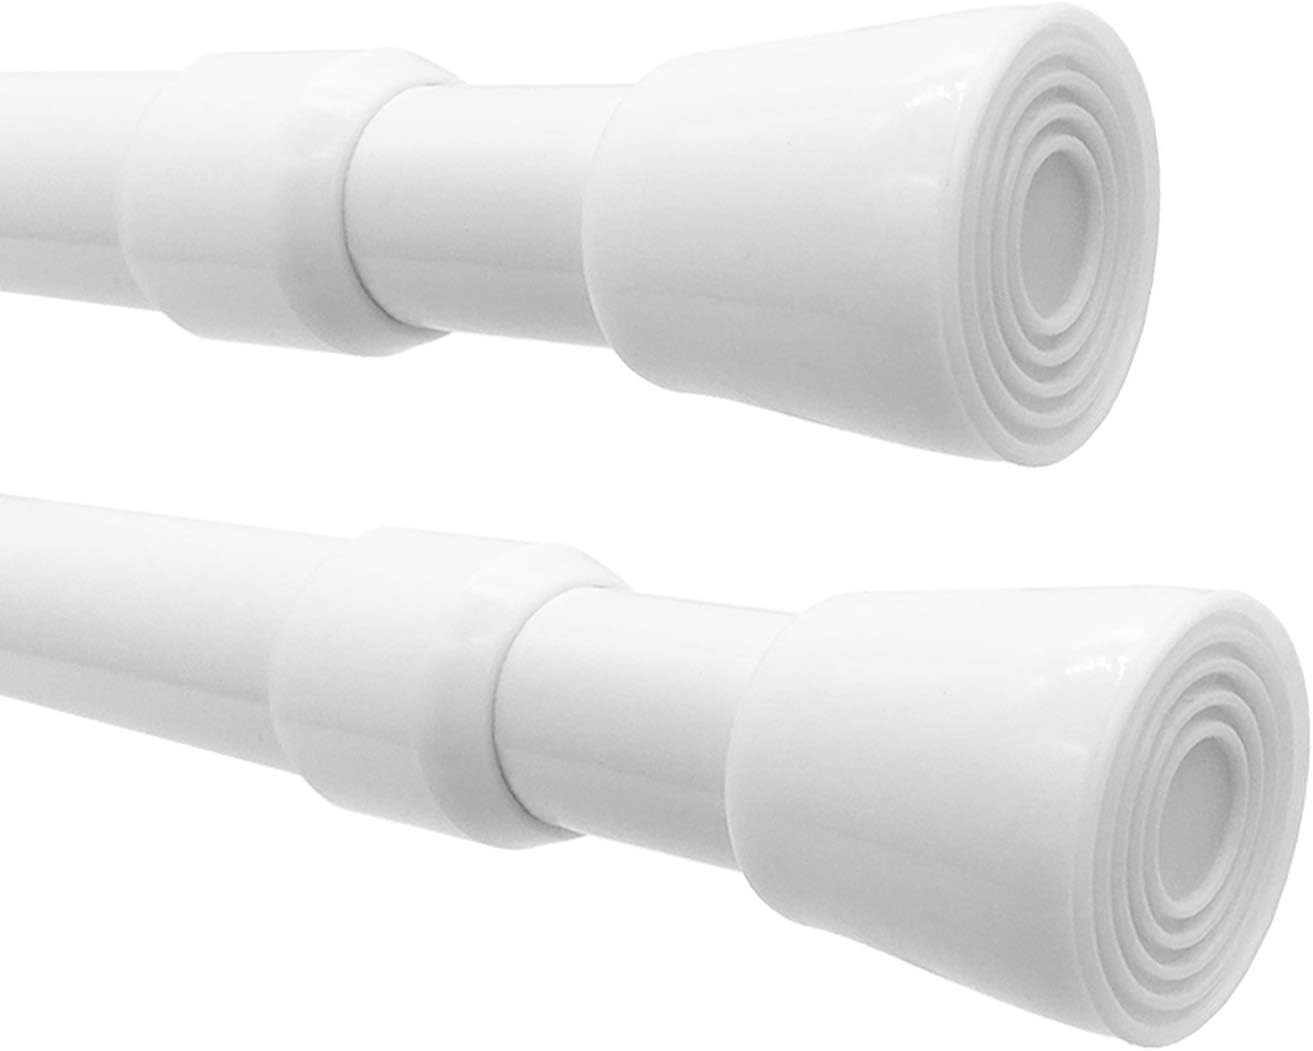 Caserry Shower Curtain Rods Pack of 2, 41-75 Inches Rust-Resistance Adjustable Spring Tension Rod for Bathroom or Doorways, White